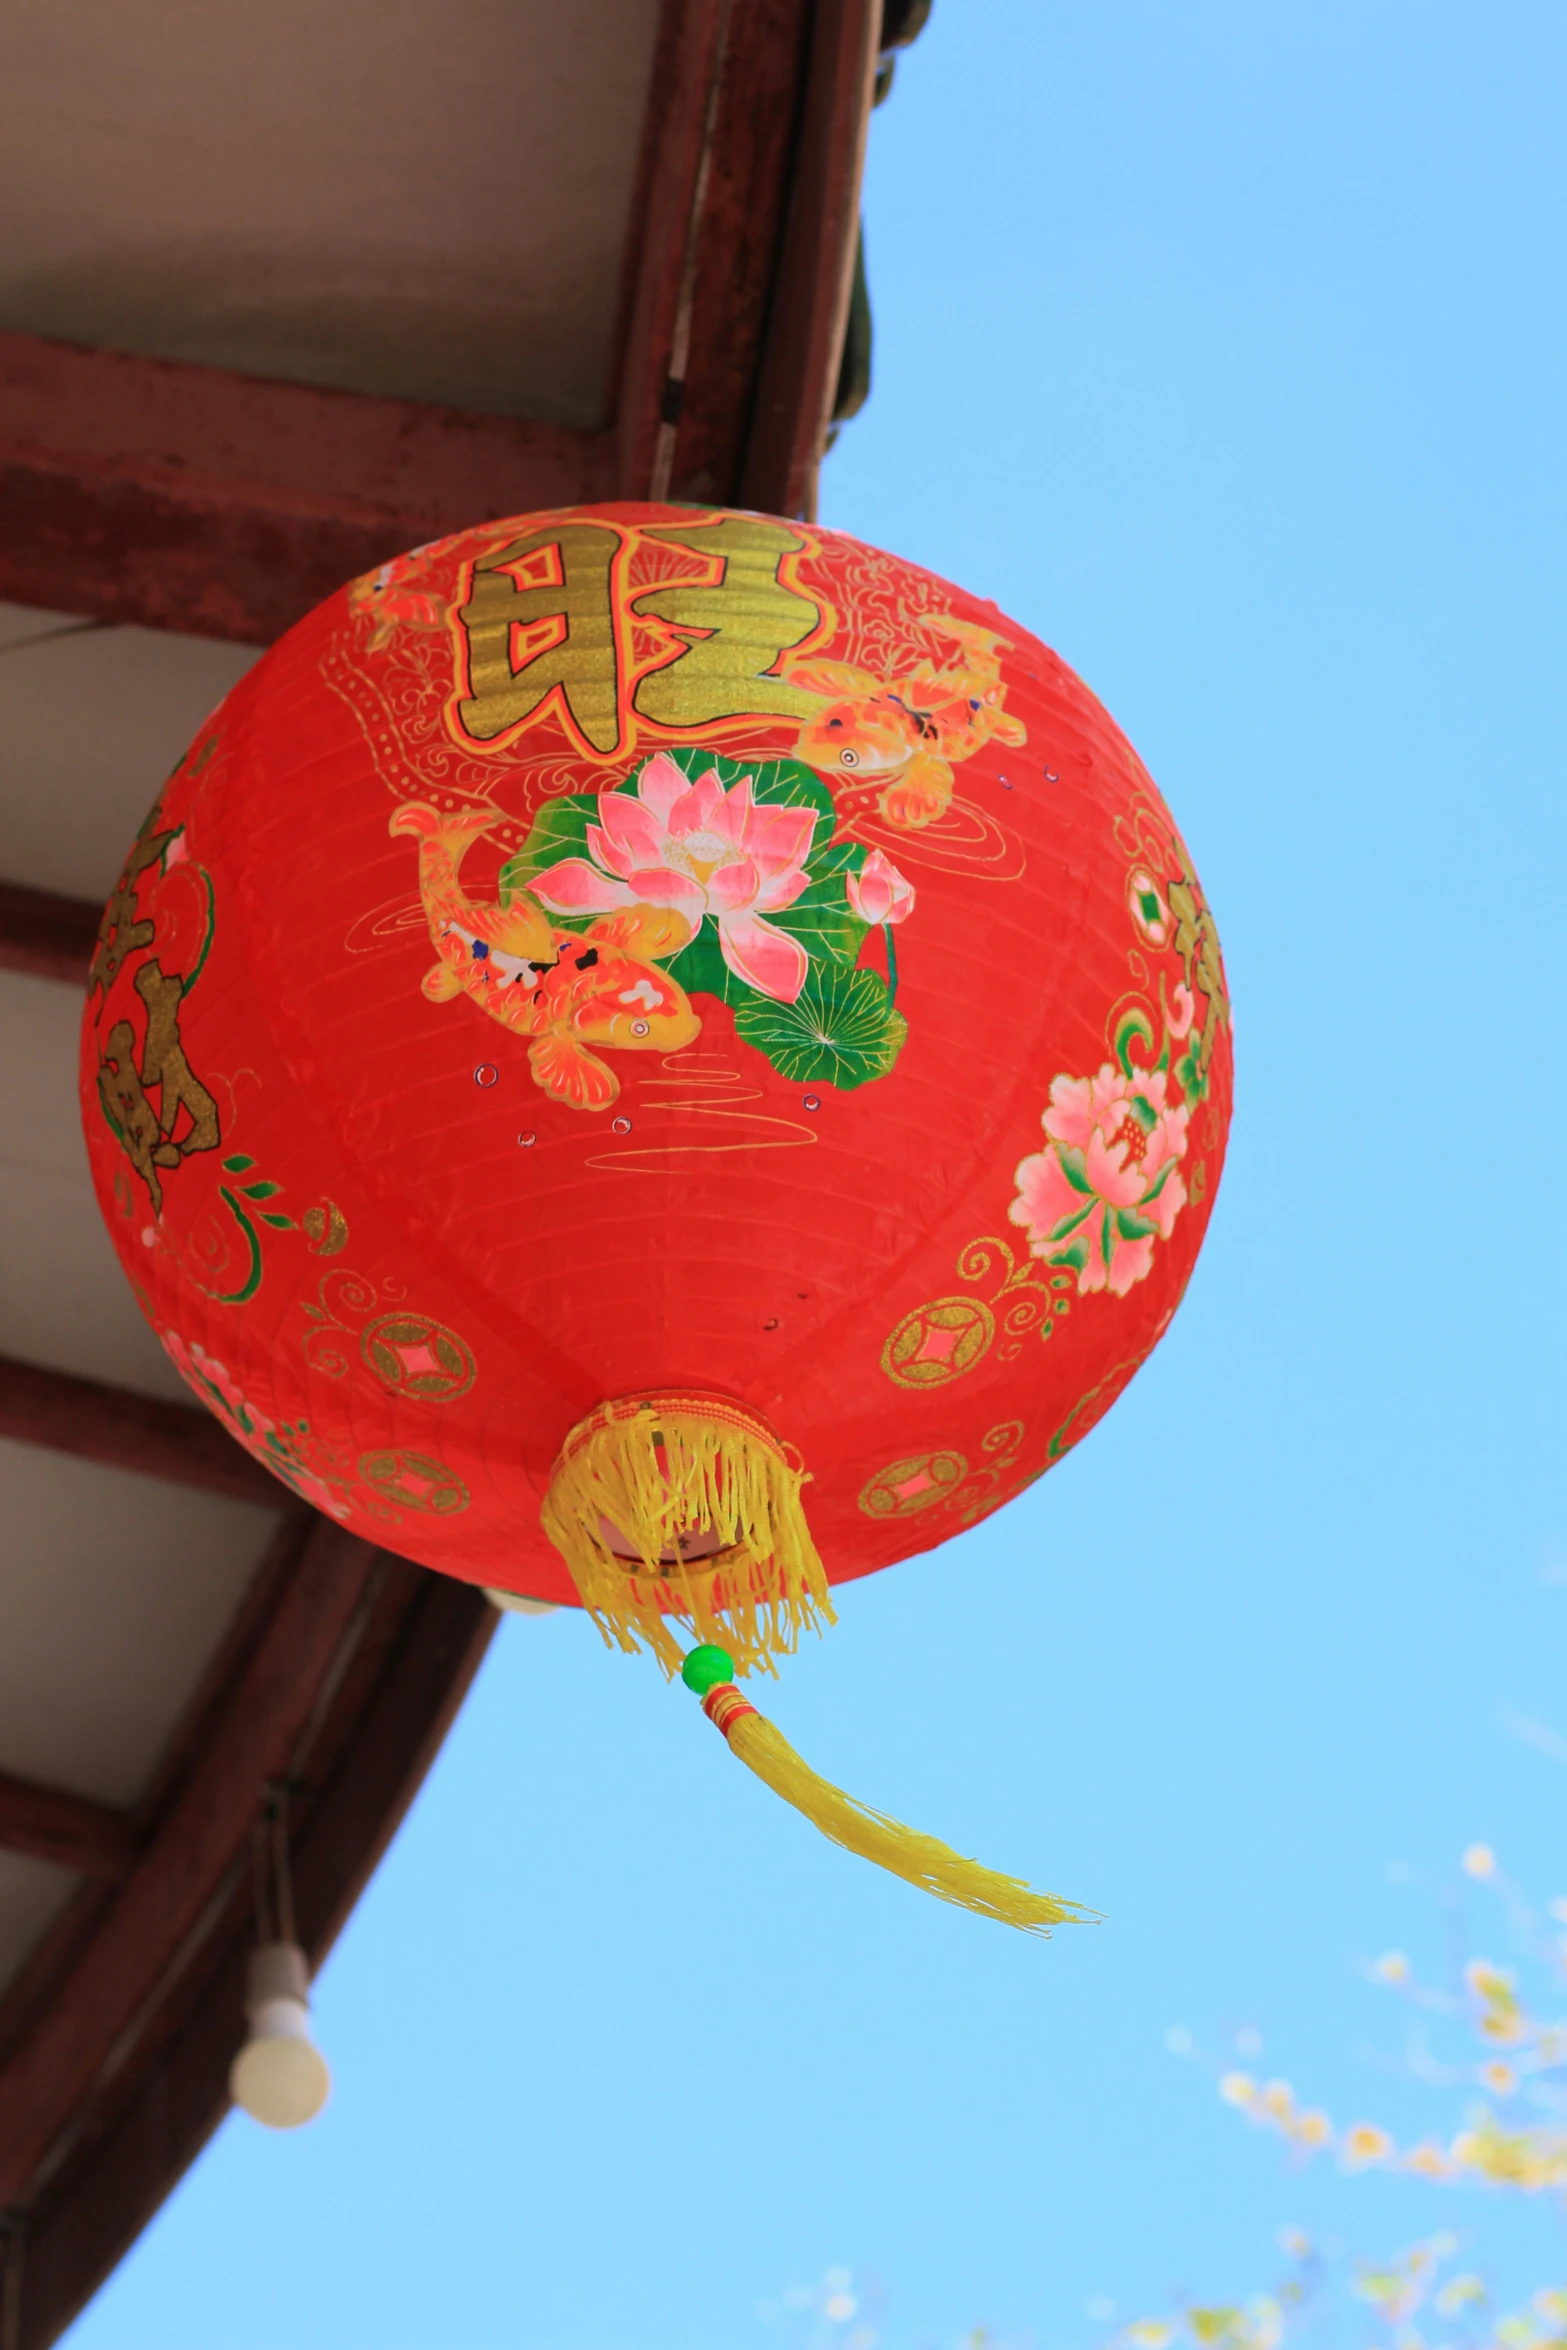 a red paper lantern on a roof against a blue sky